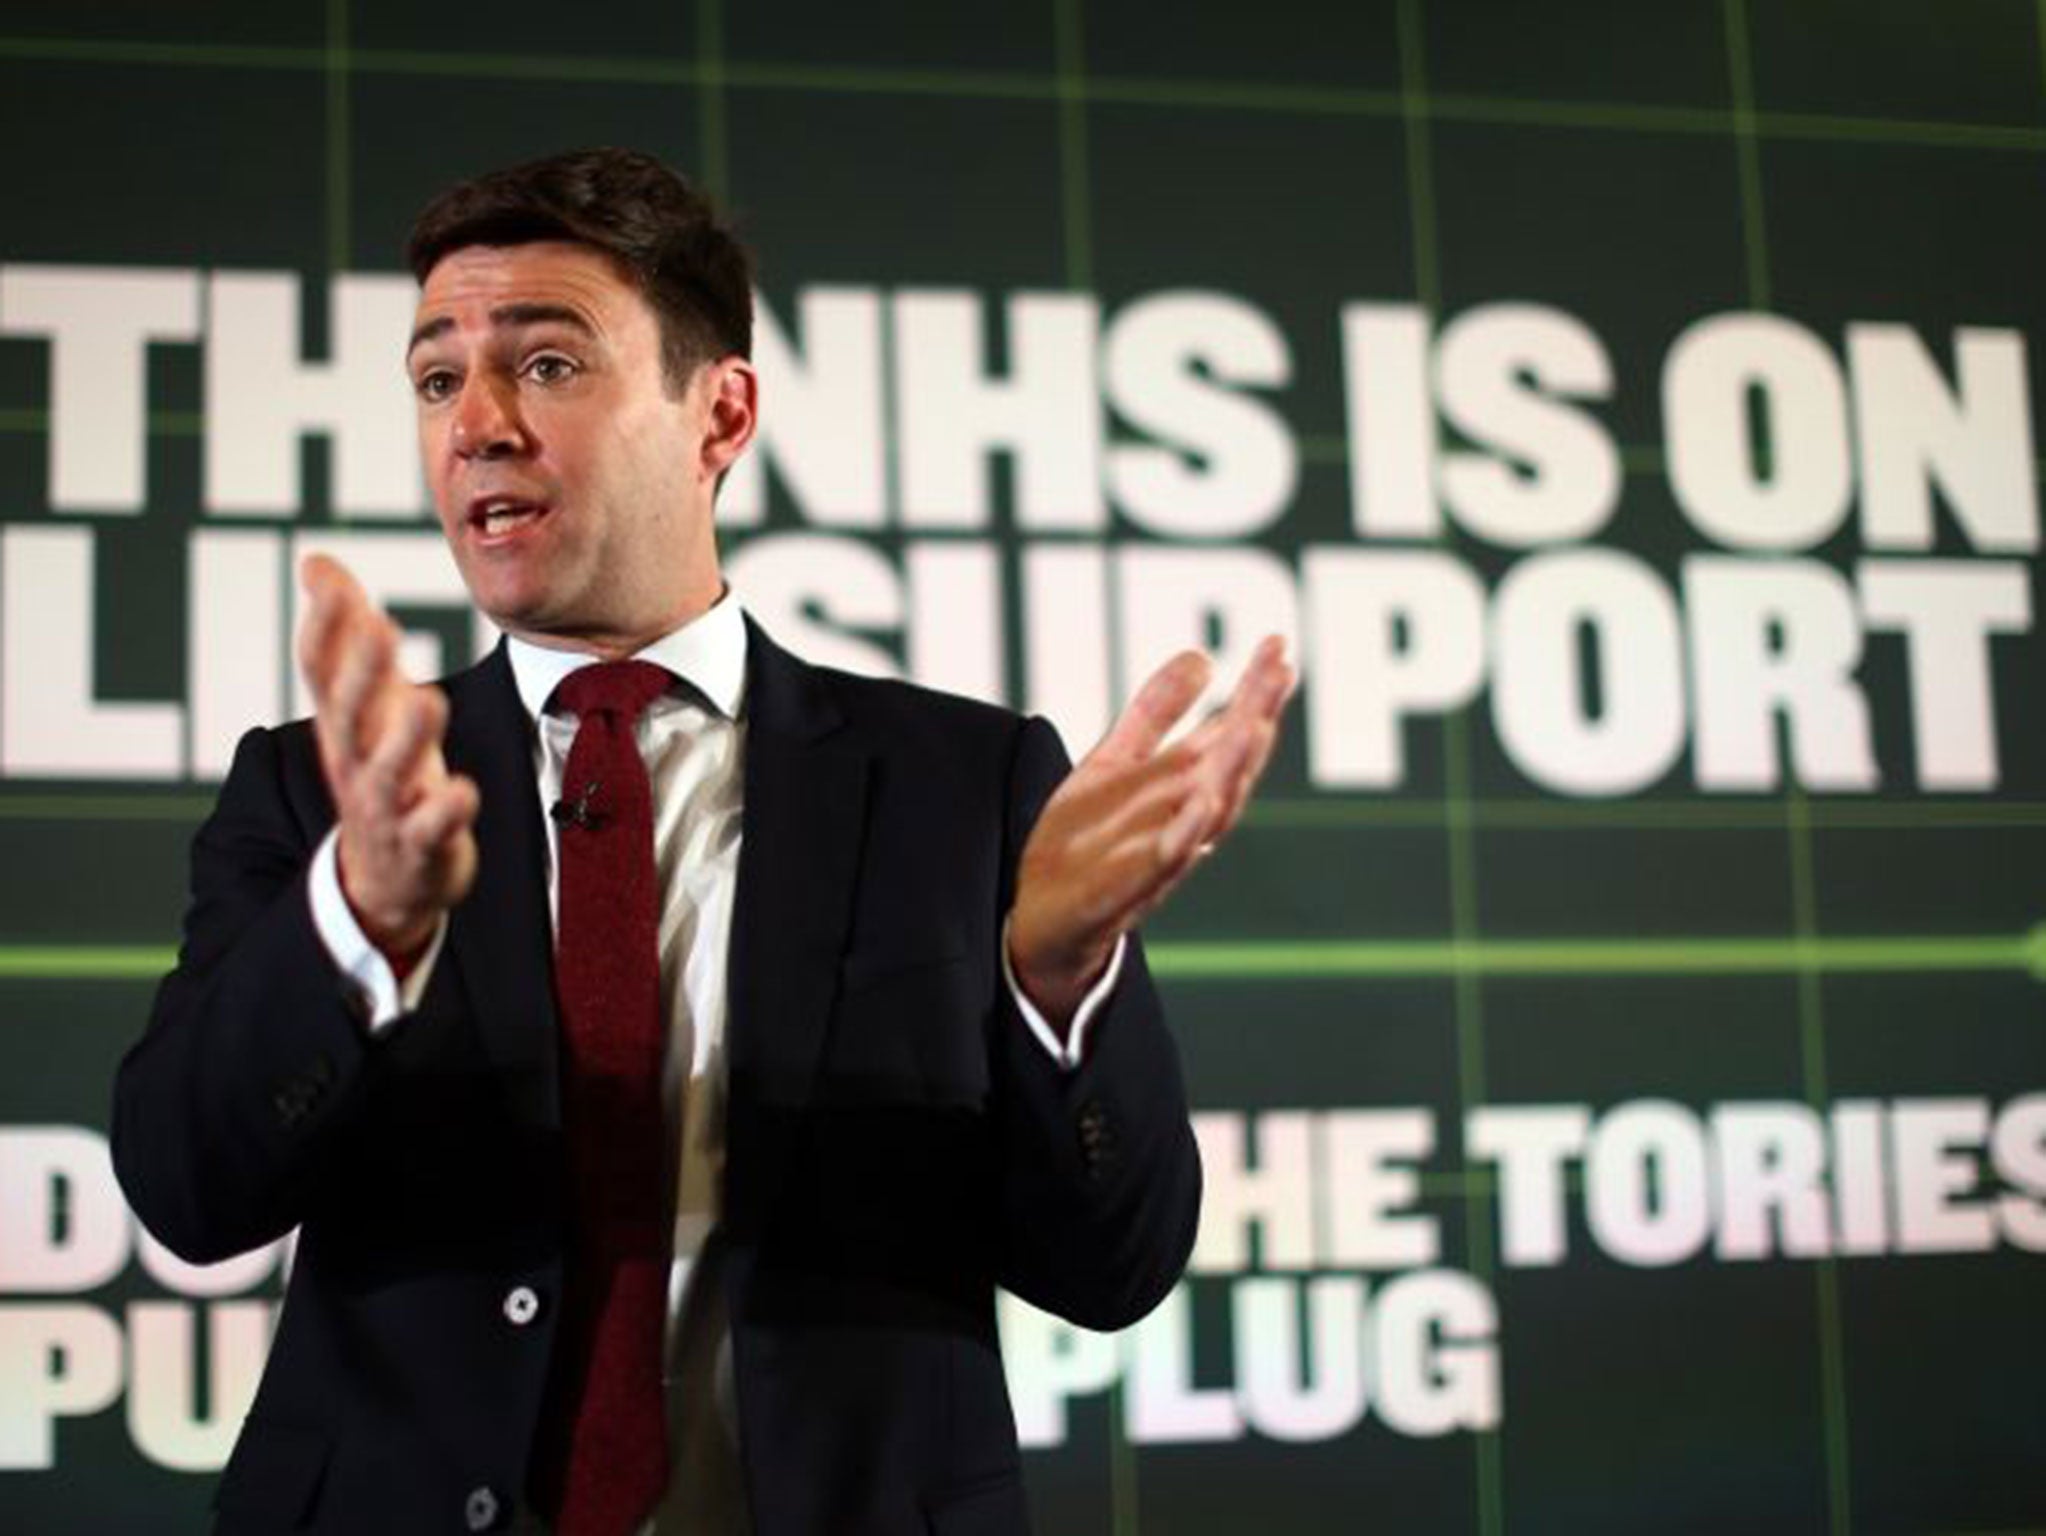 Yvette Cooper will suggest her rival Andy Burnham is the “continuity Miliband” candidate (Ge